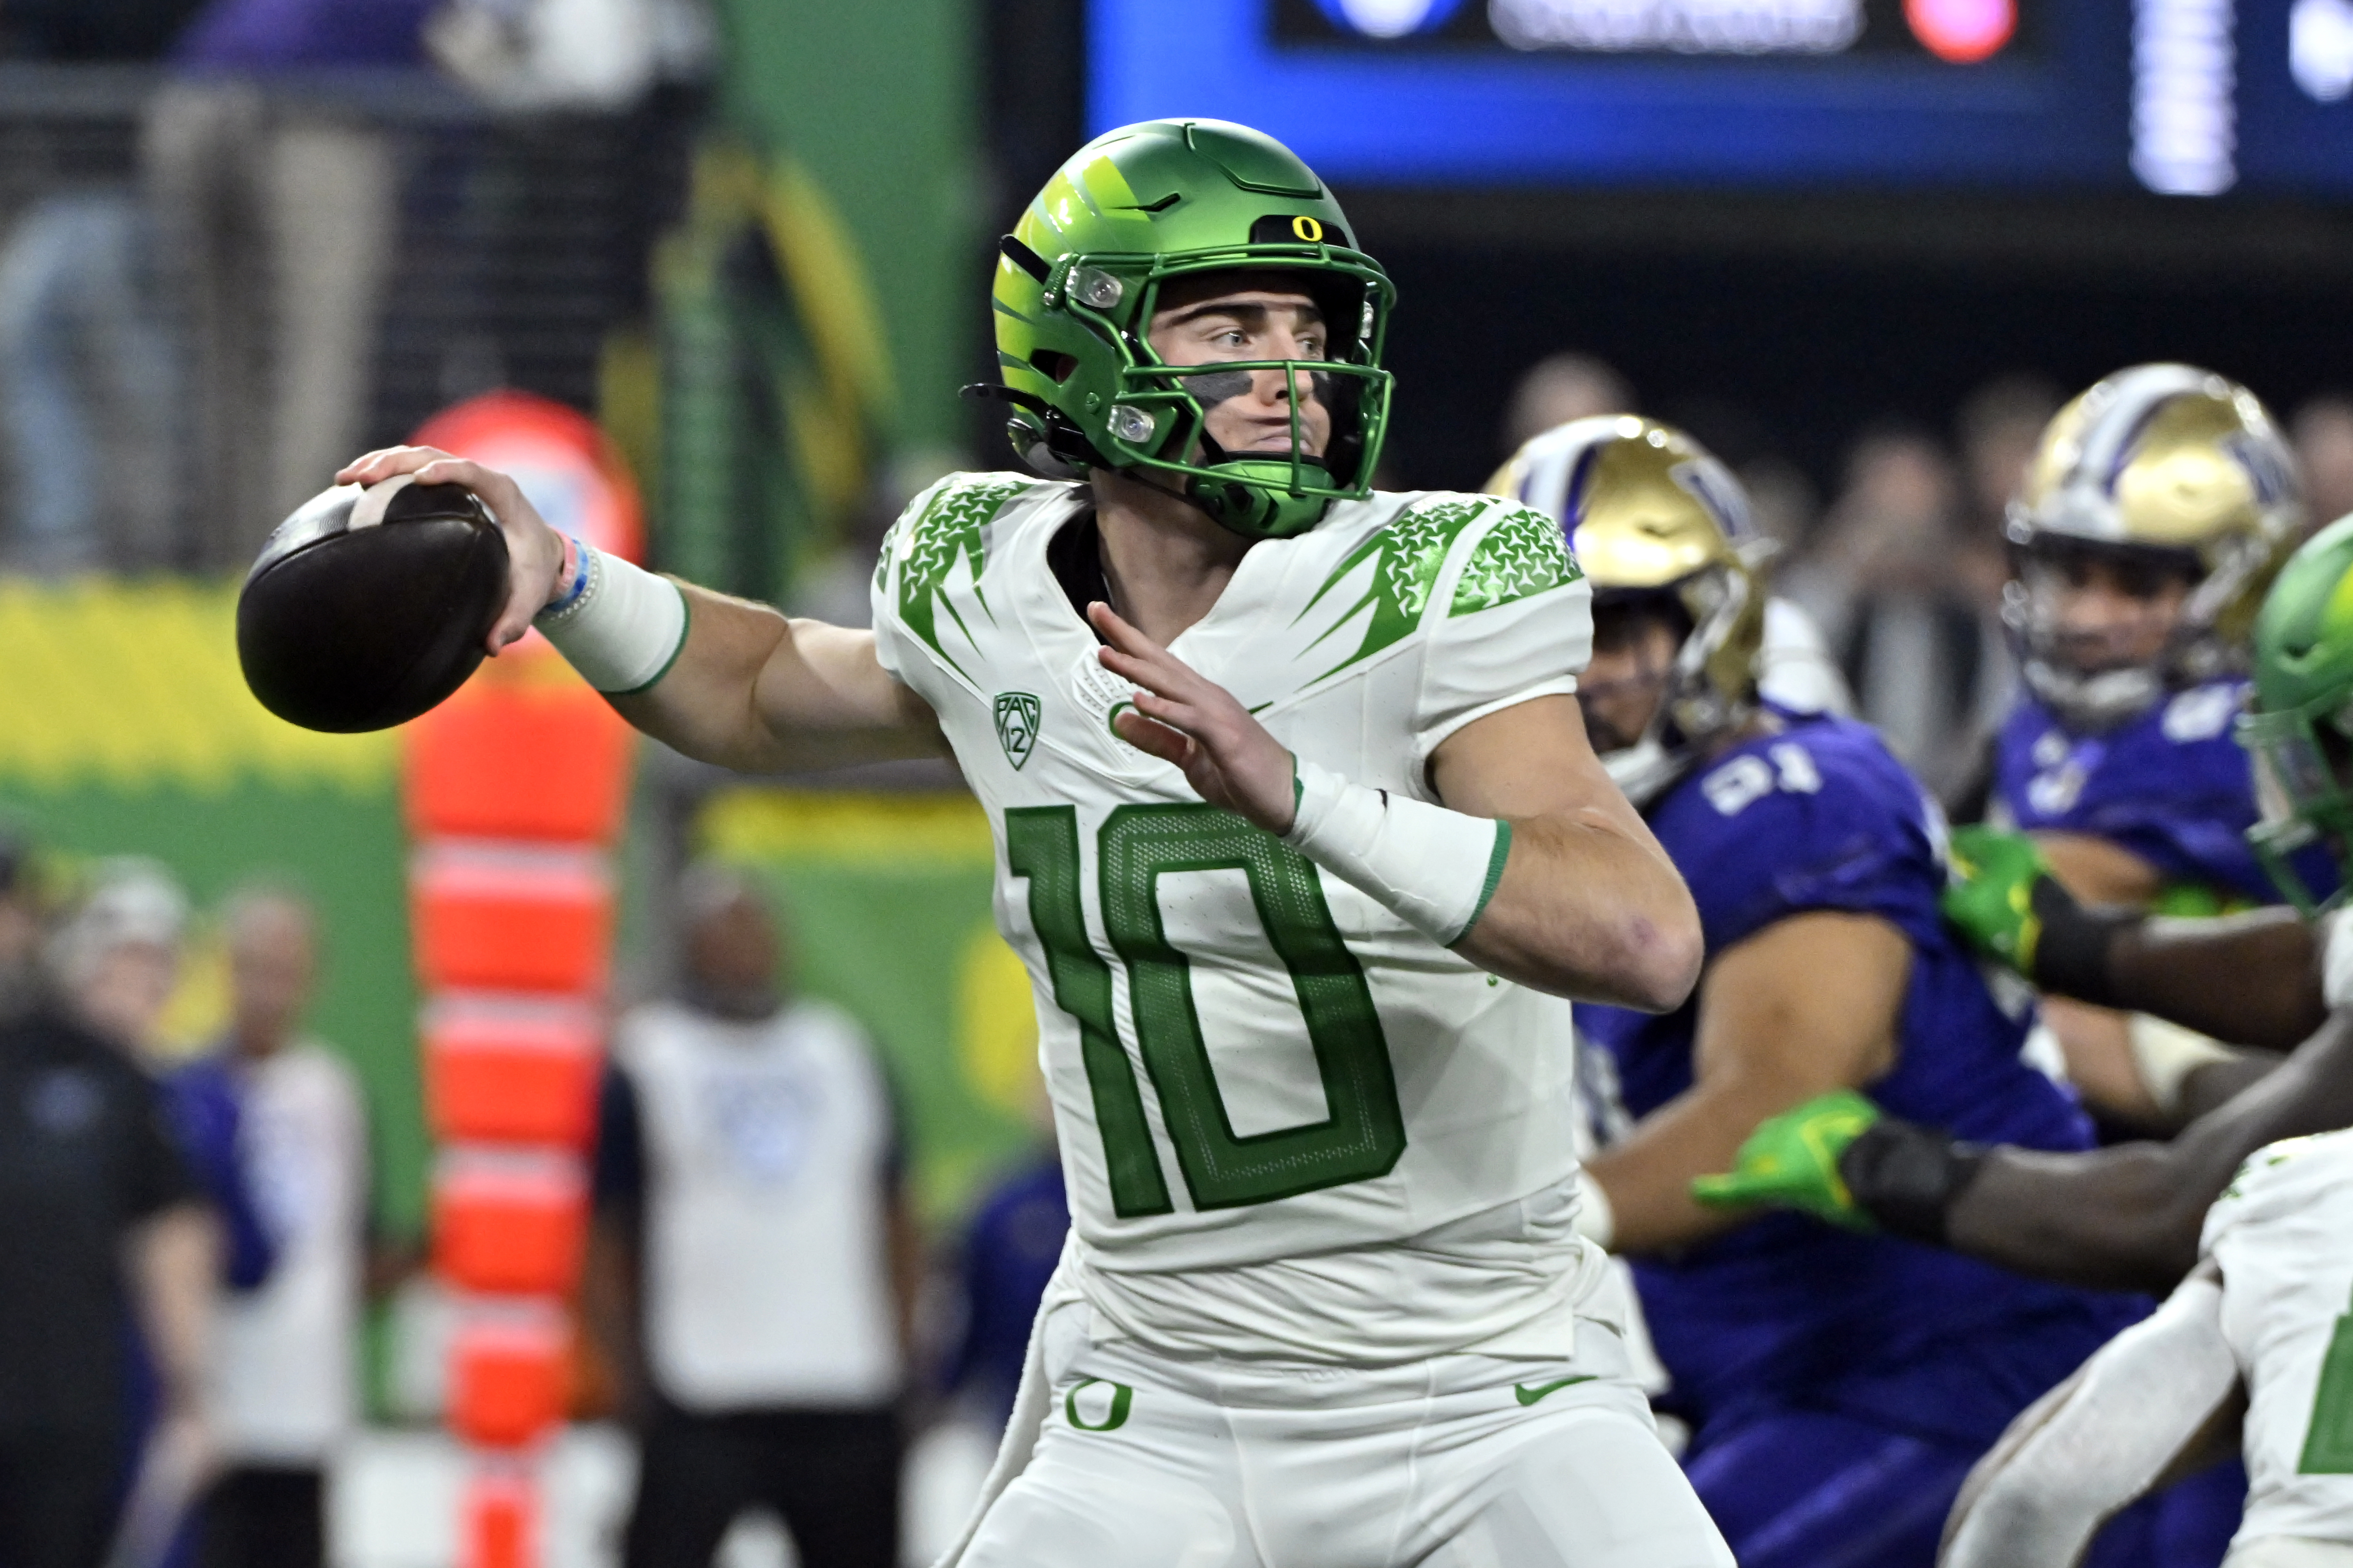 Oregon's Bo Nix ends 5-year college odyssey as one of most productive QBs  in NCAA history - OPB